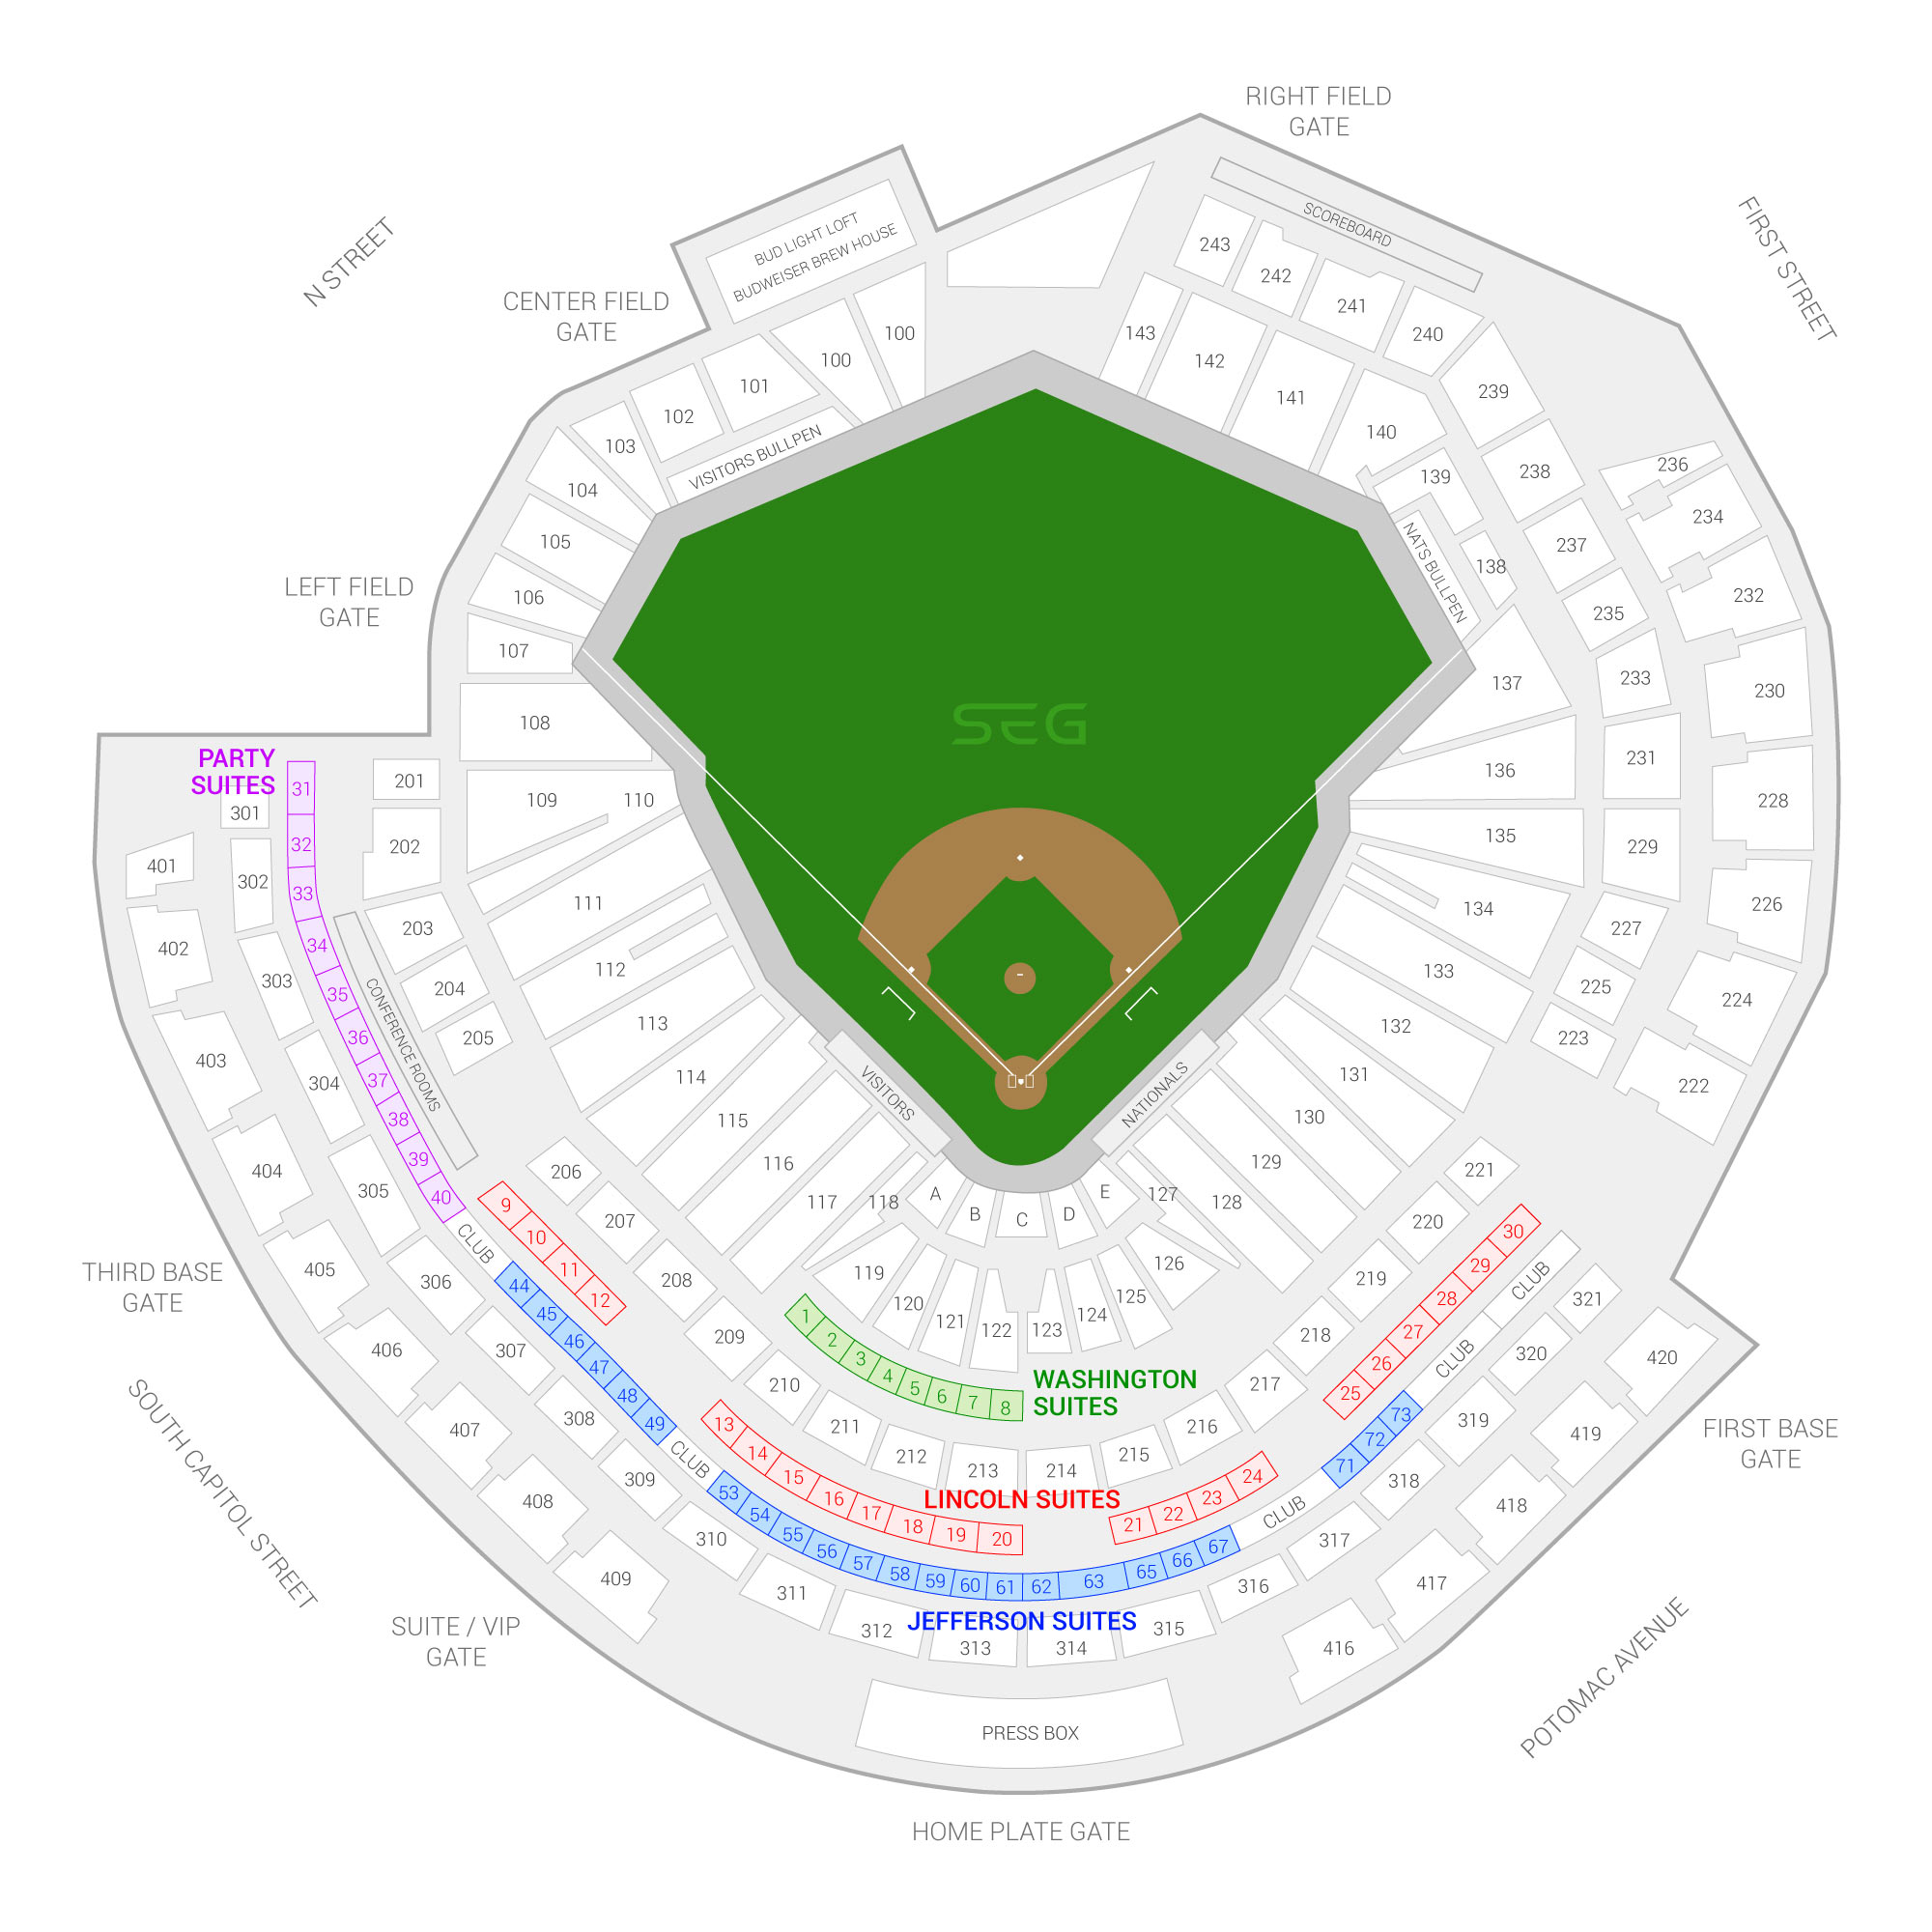 Nationals Park / Washington Nationals Suite Map and Seating Chart